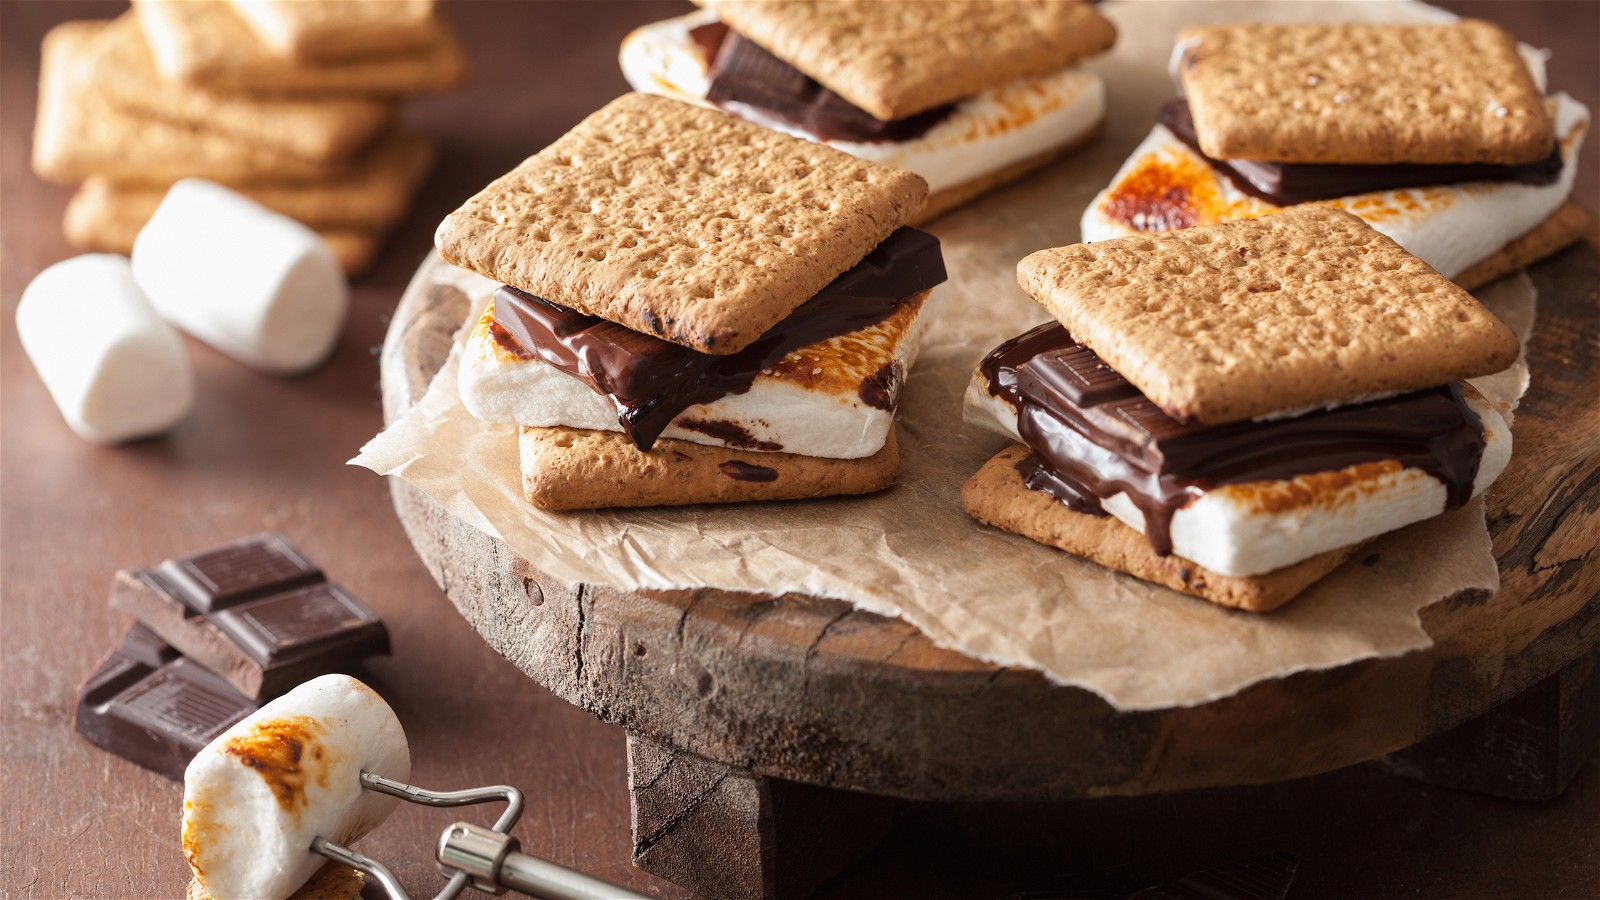 Image of PB & S'mores